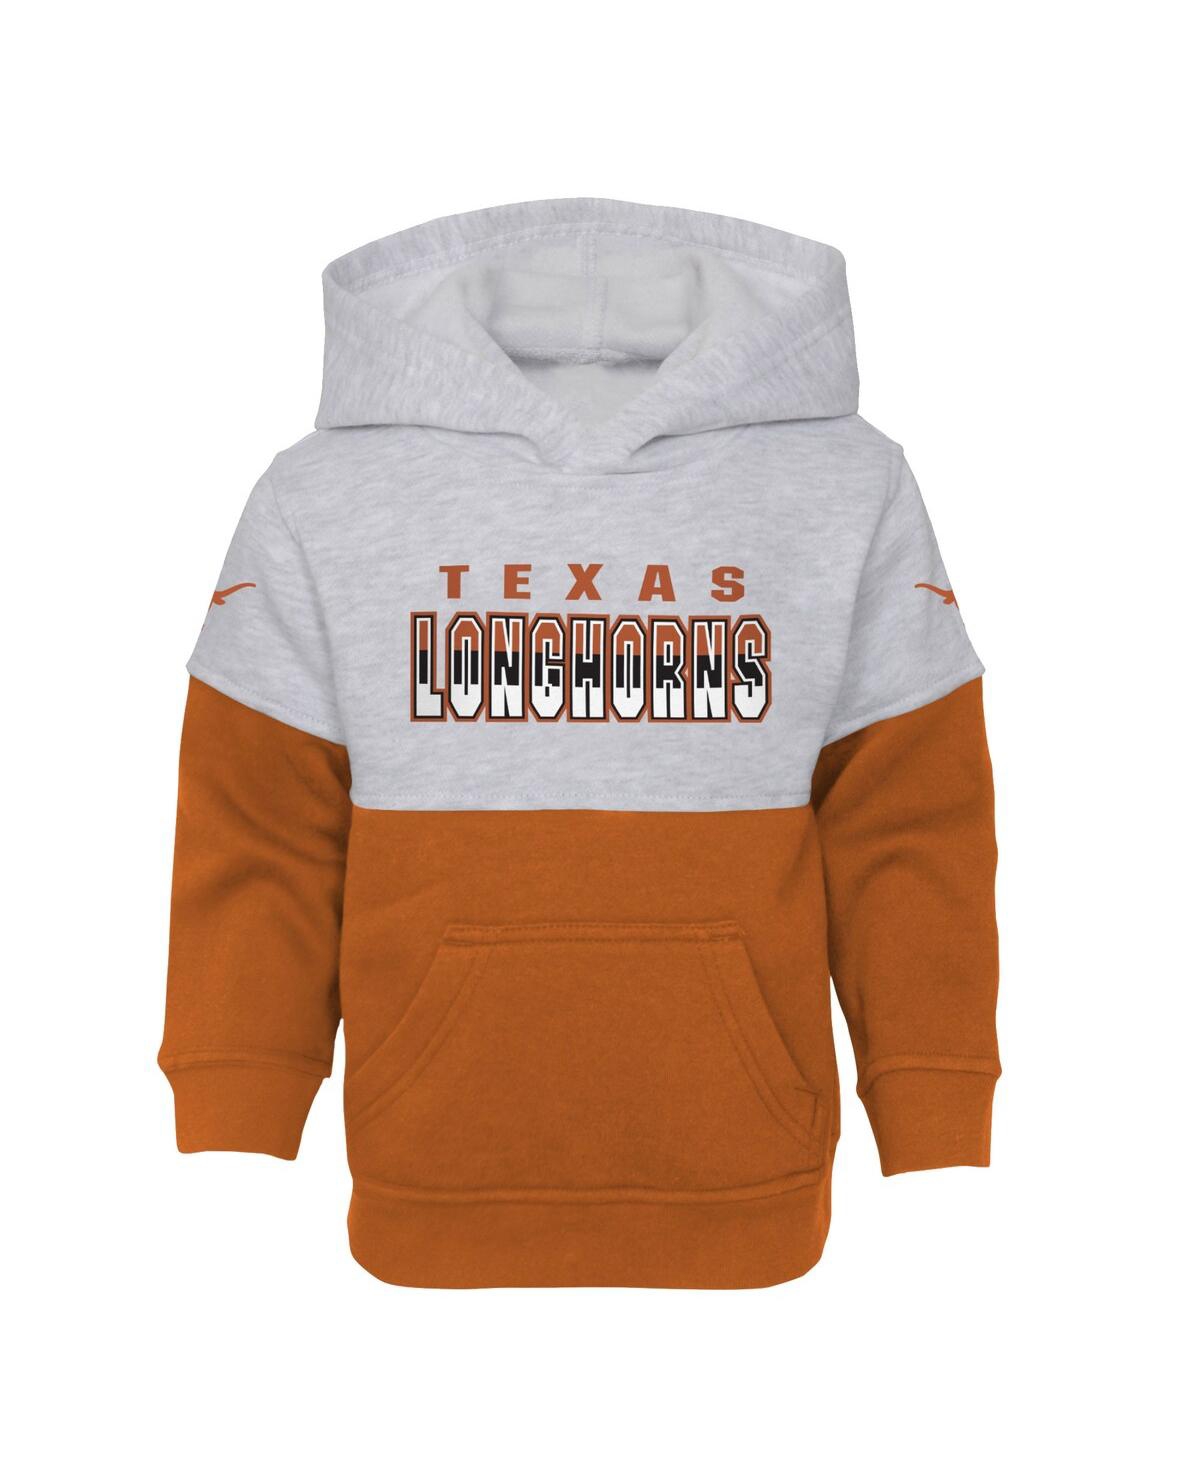 Shop Outerstuff Infant Boys And Girls Heather Gray, Texas Orange Texas Longhorns Playmaker Pullover Hoodie And Pants In Heather Gray,texas Orange